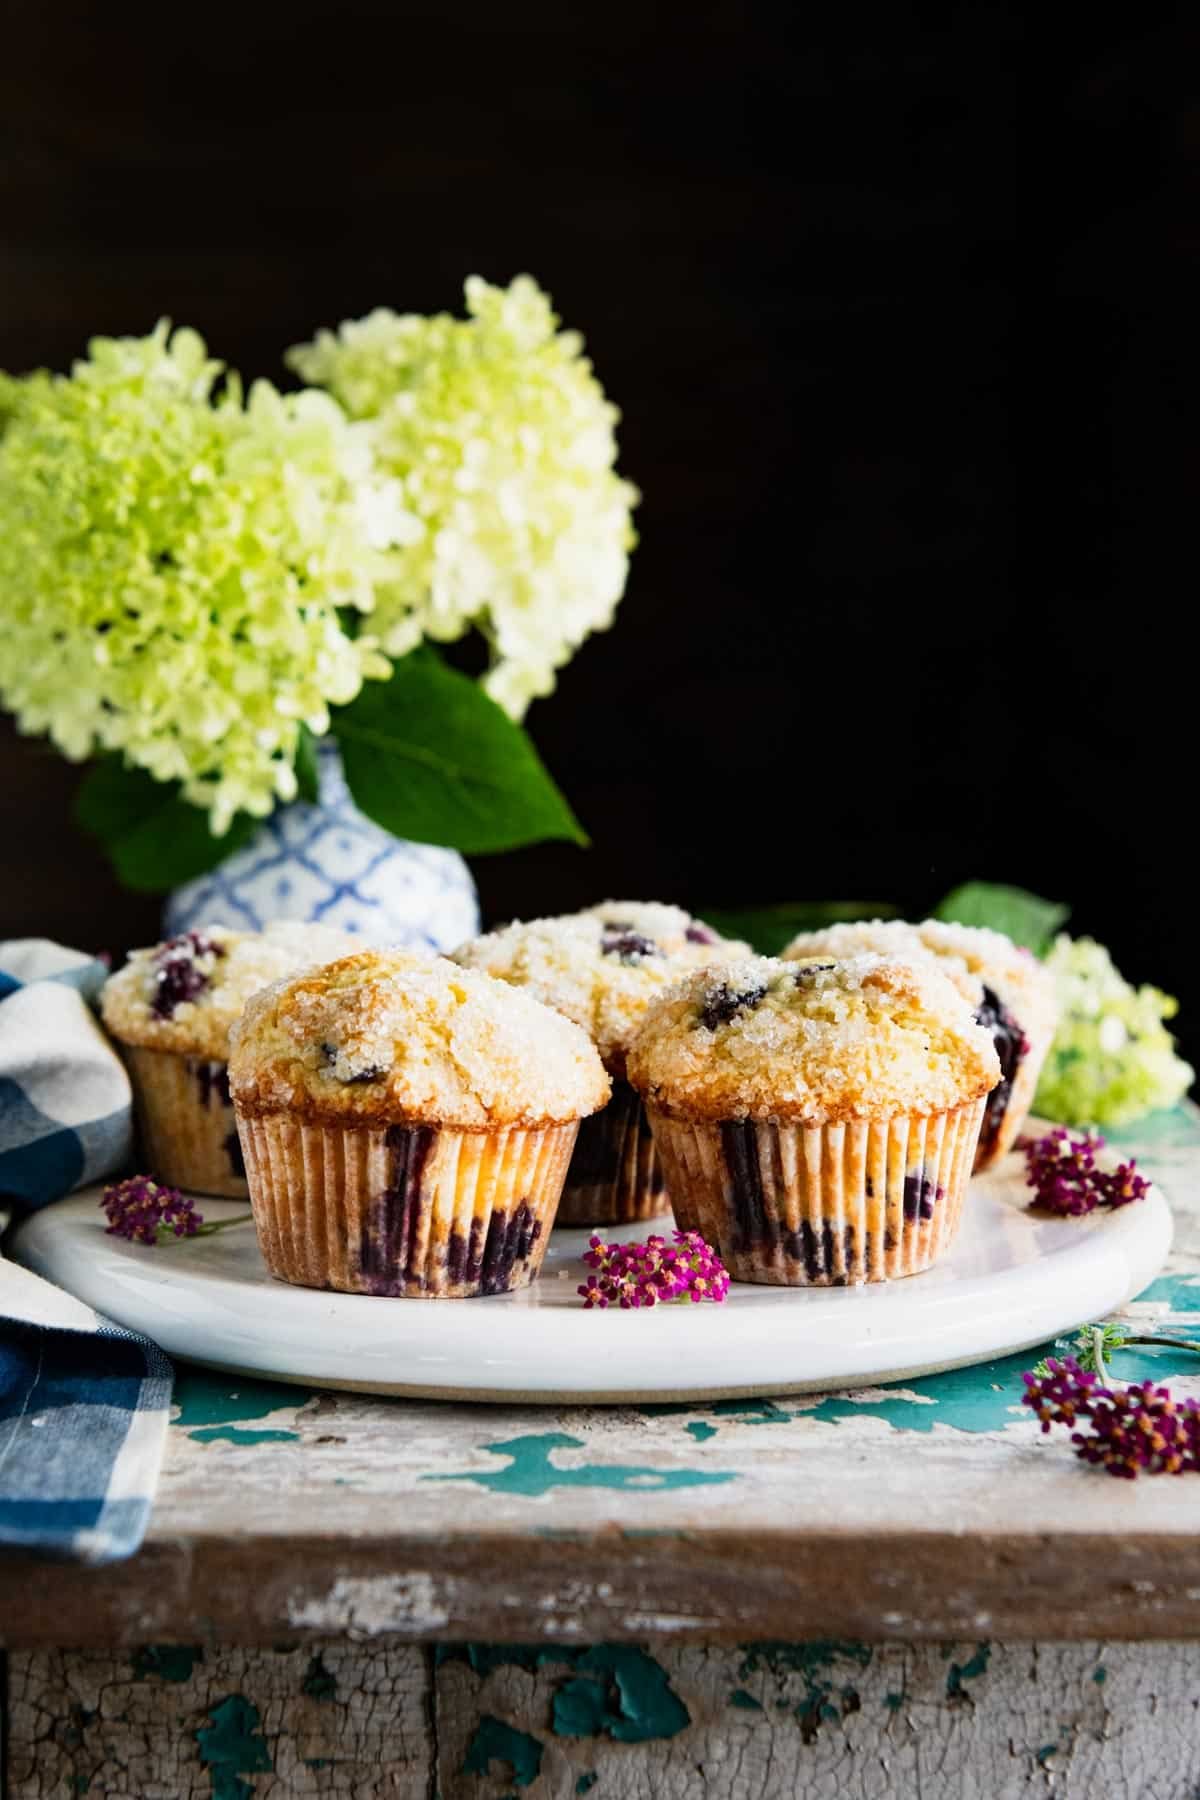 Plate of sour cream blueberry muffins on a rustic turquoise wooden chest.